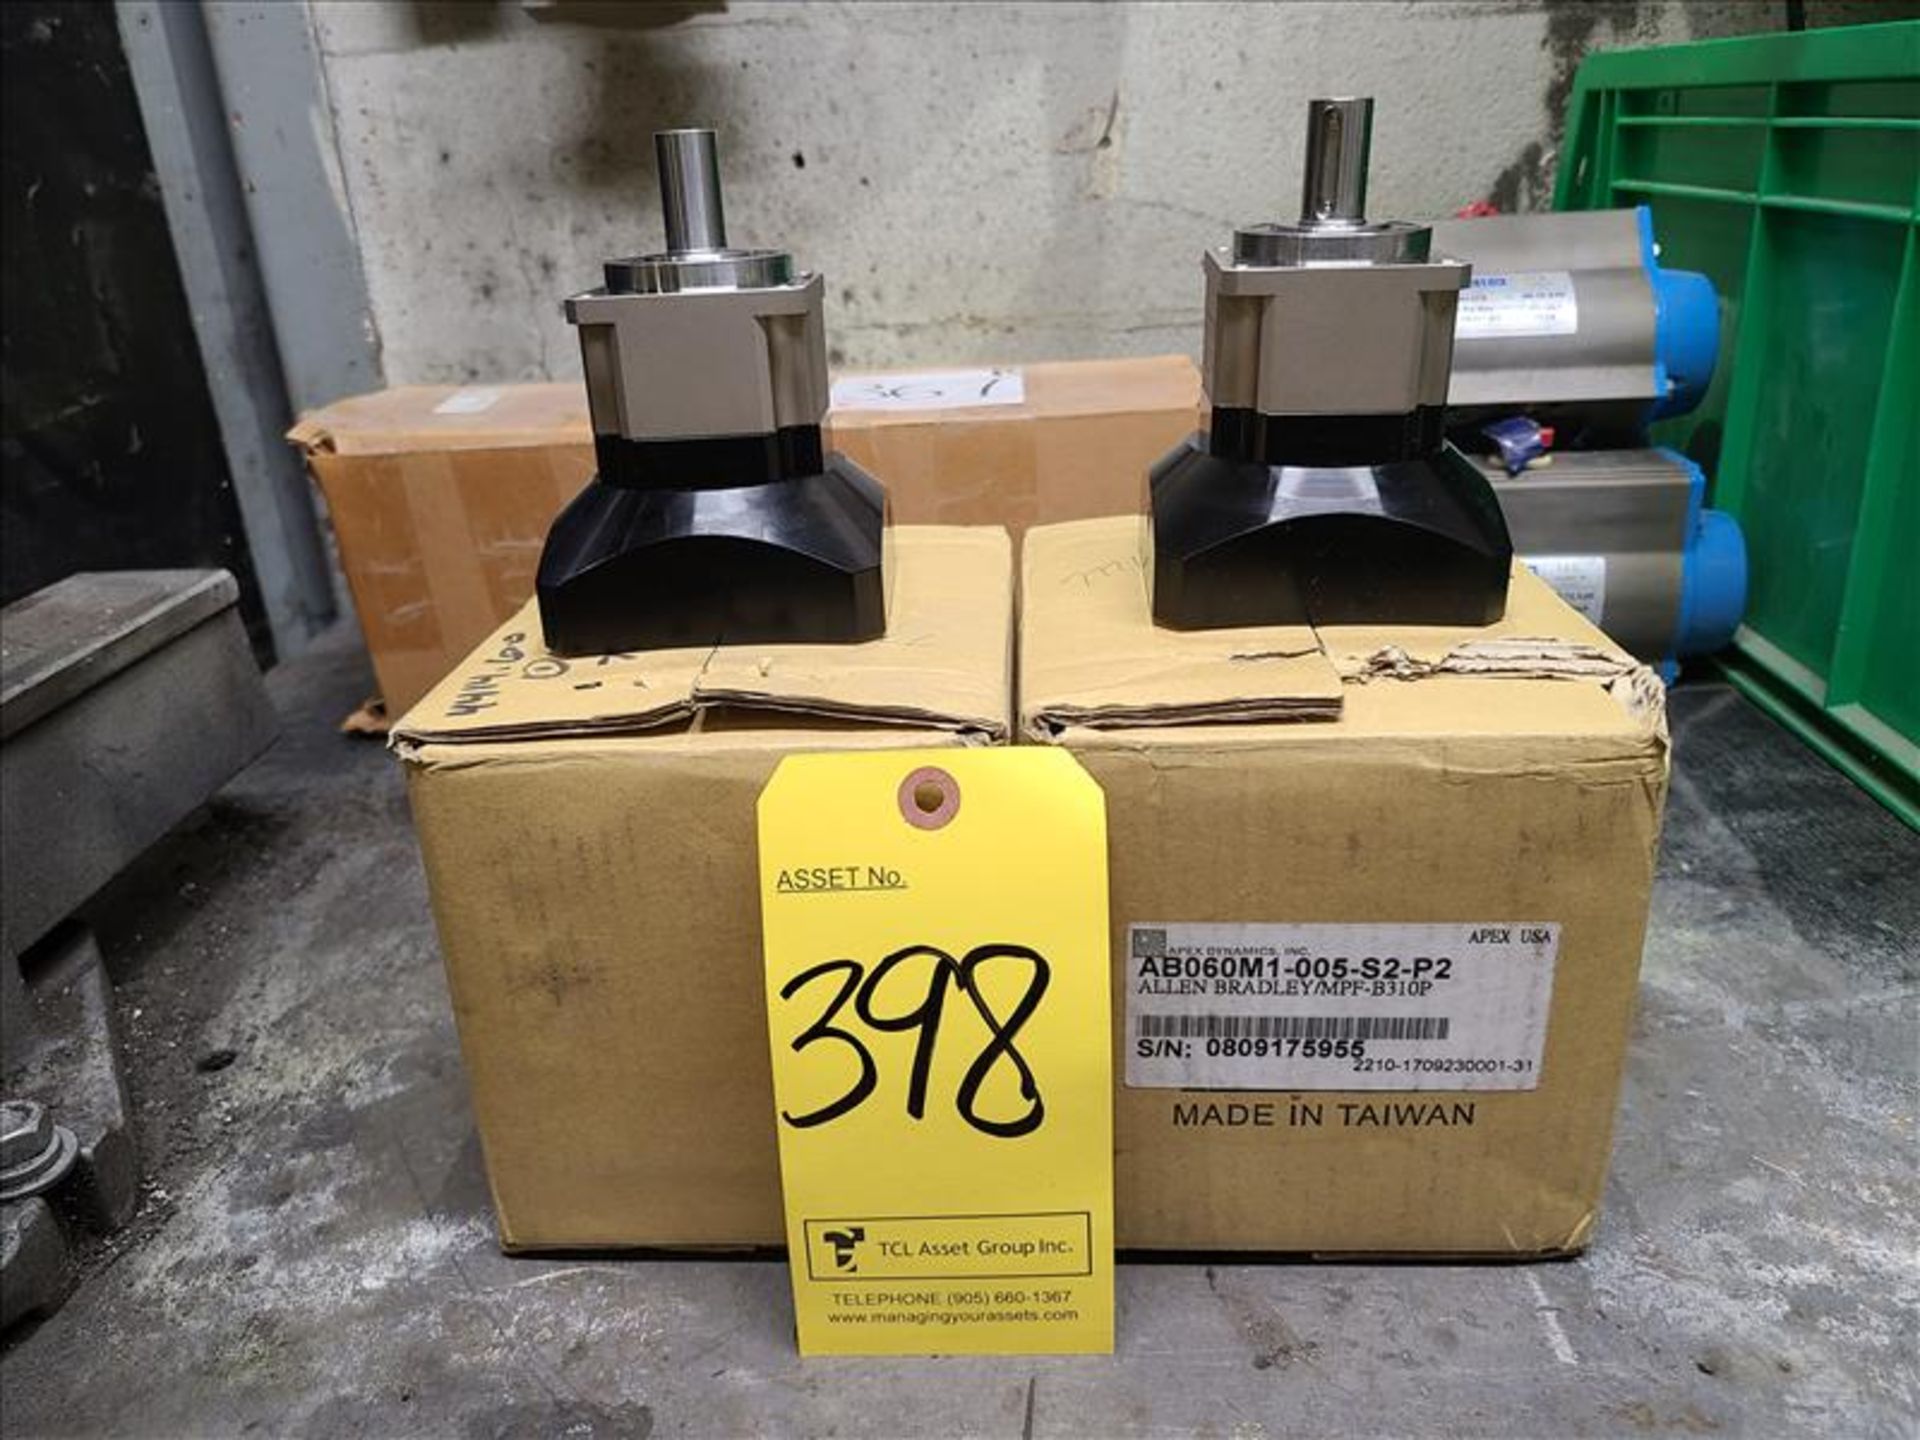 (2) Apex Dynamics Gearboxes, model AB060-S2-P2